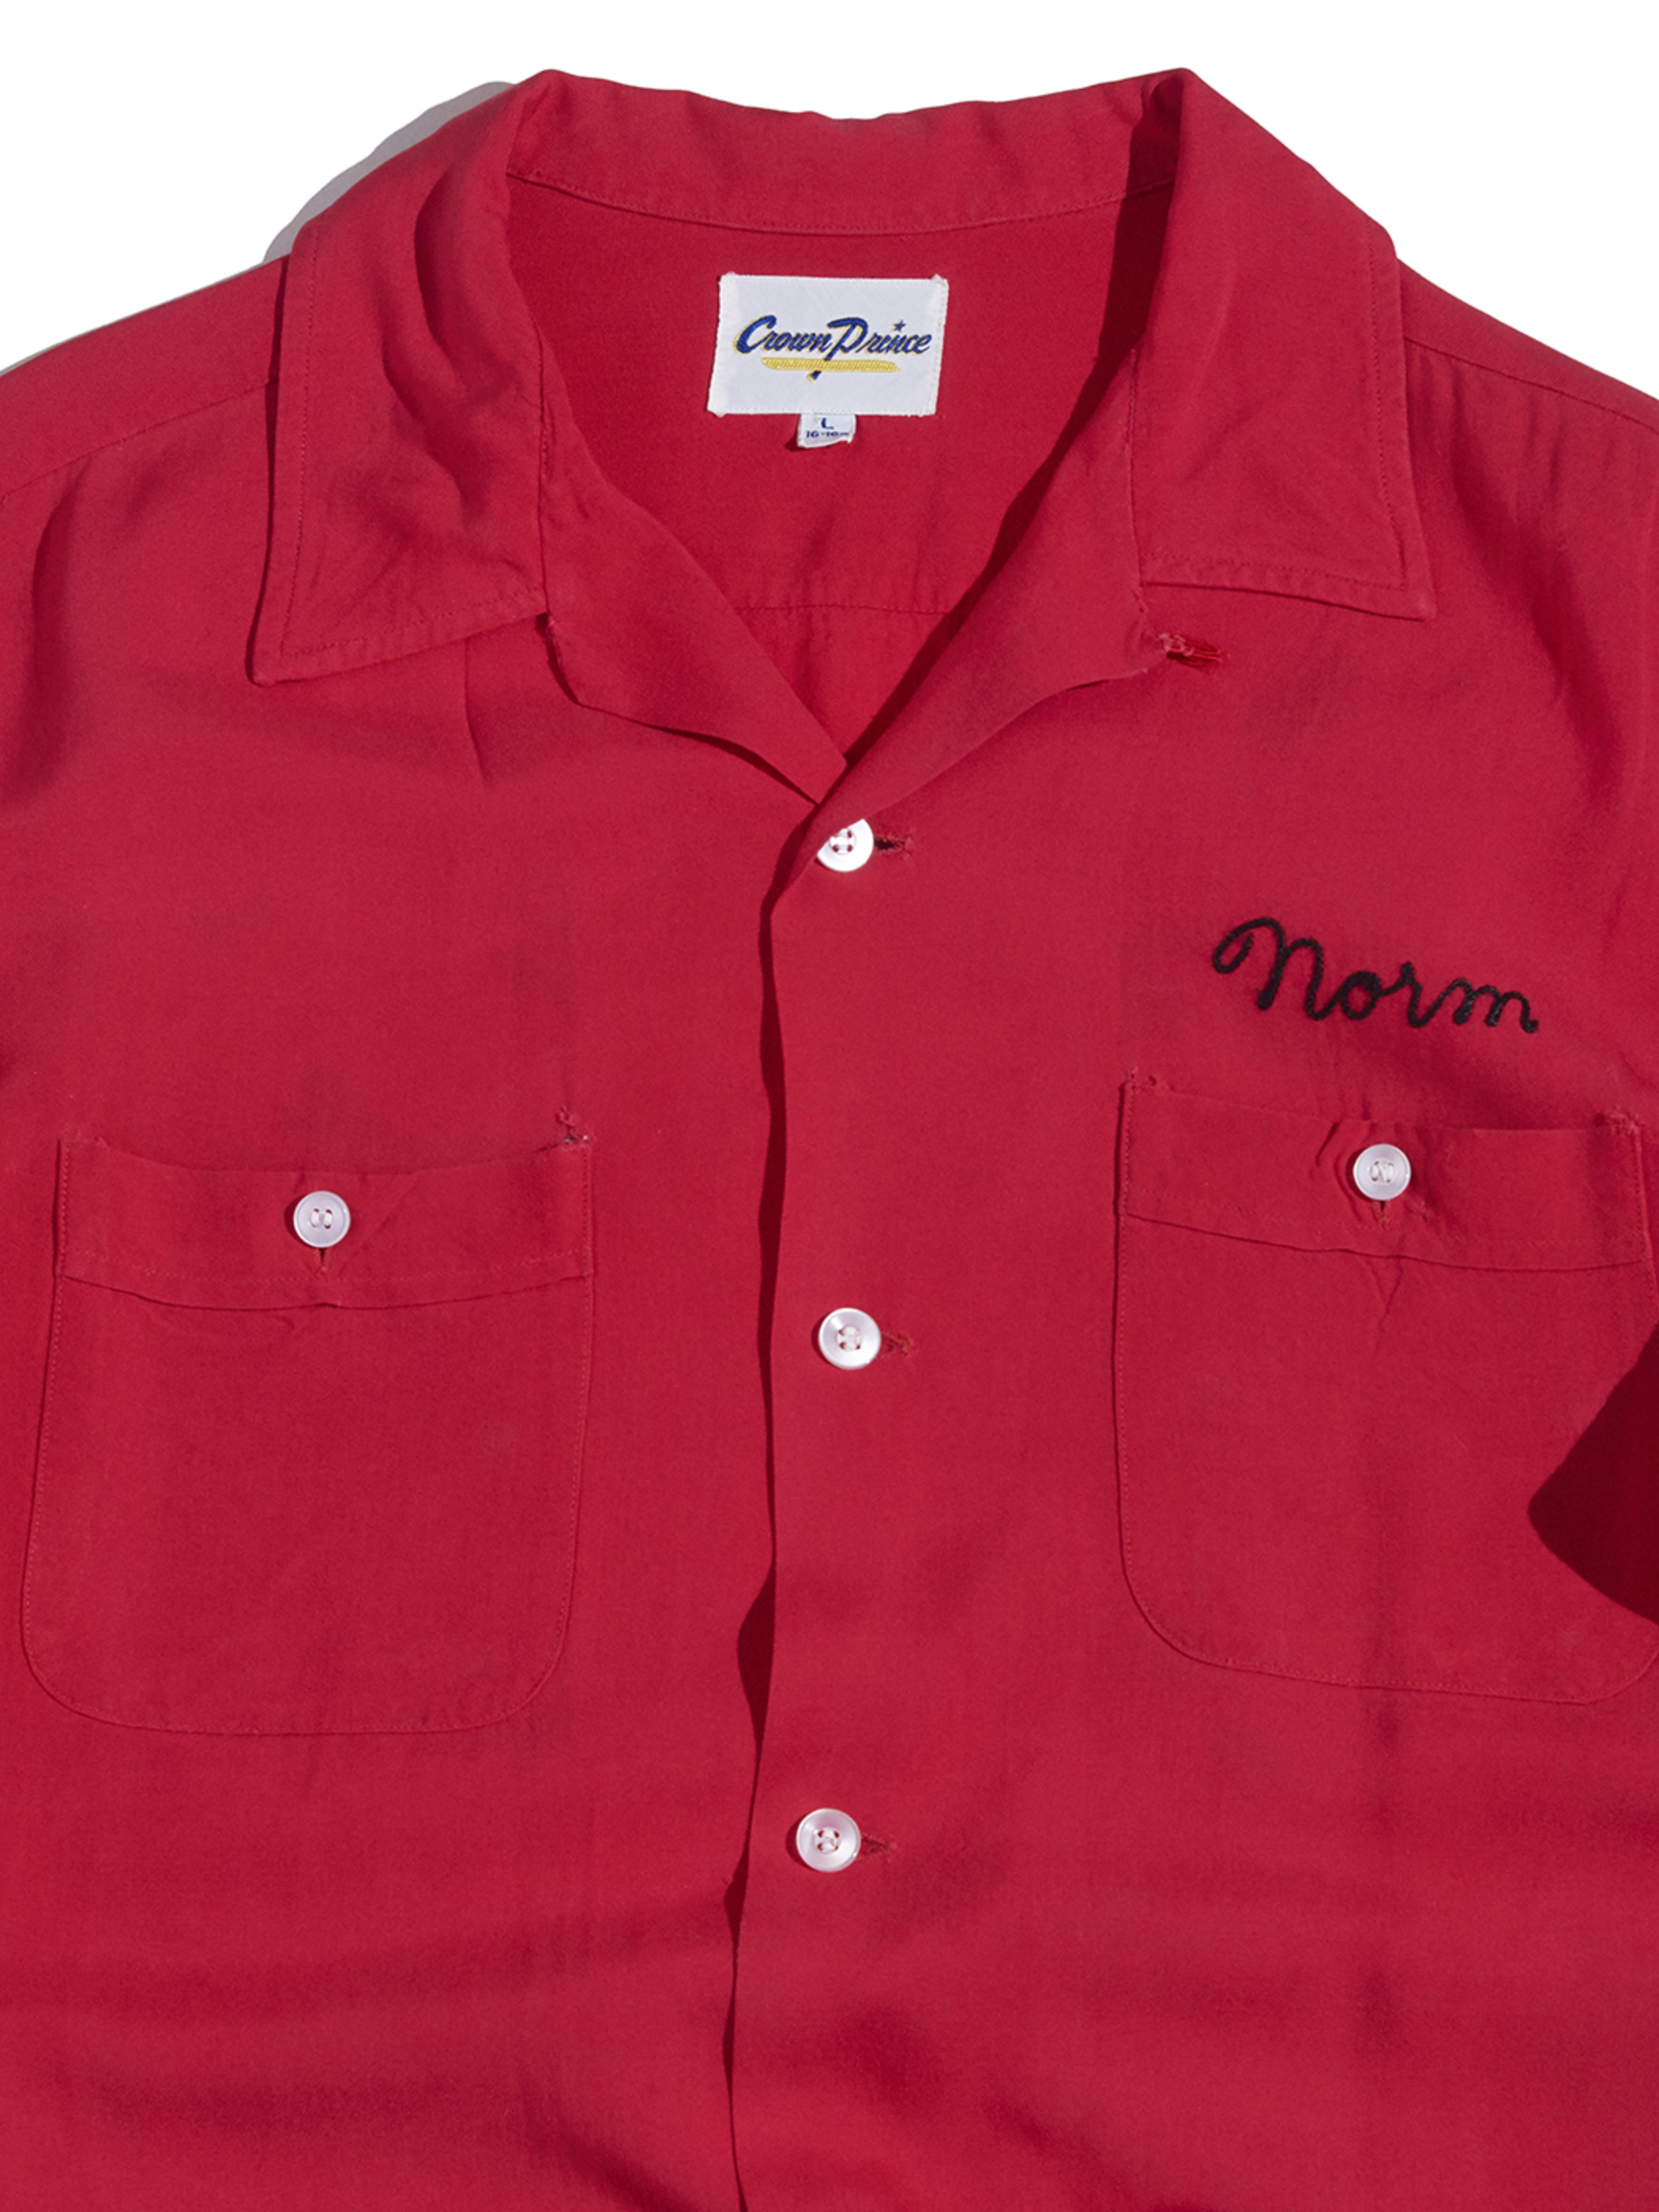 1960s "Crown Prince" s/s rayon embroidery shirt -RED-